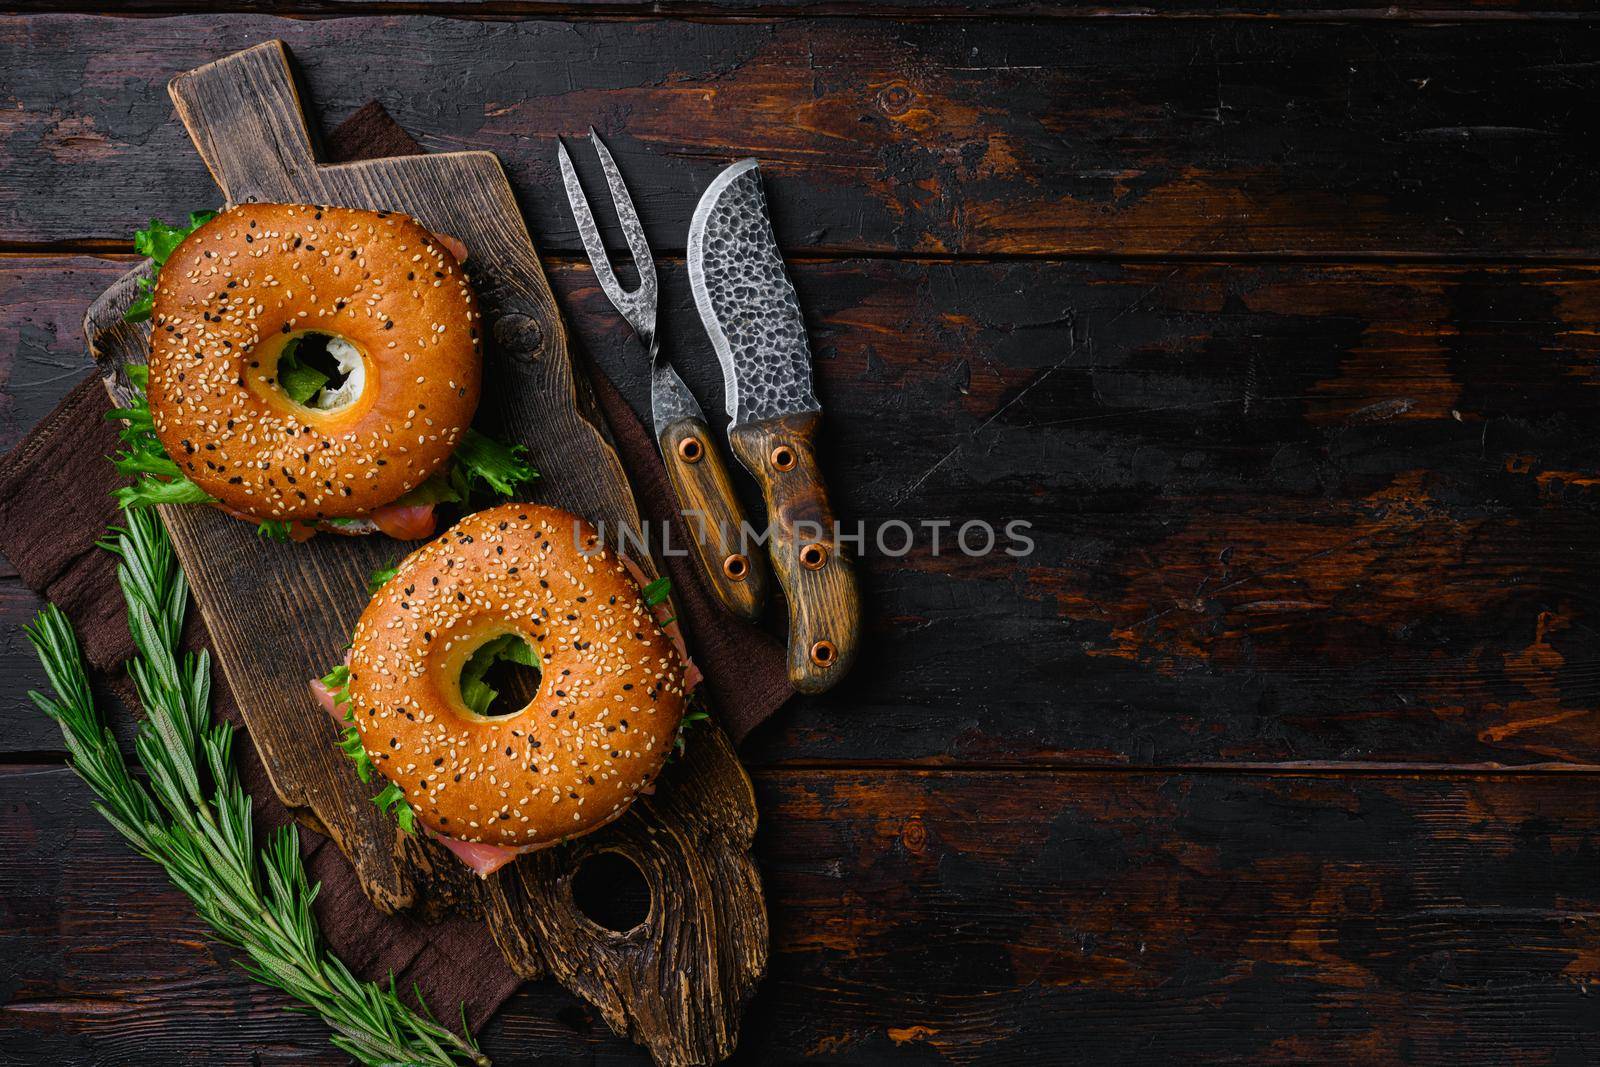 Bagel with red fish and soft cheese, on old dark wooden table background, top view flat lay, with copy space for text by Ilianesolenyi